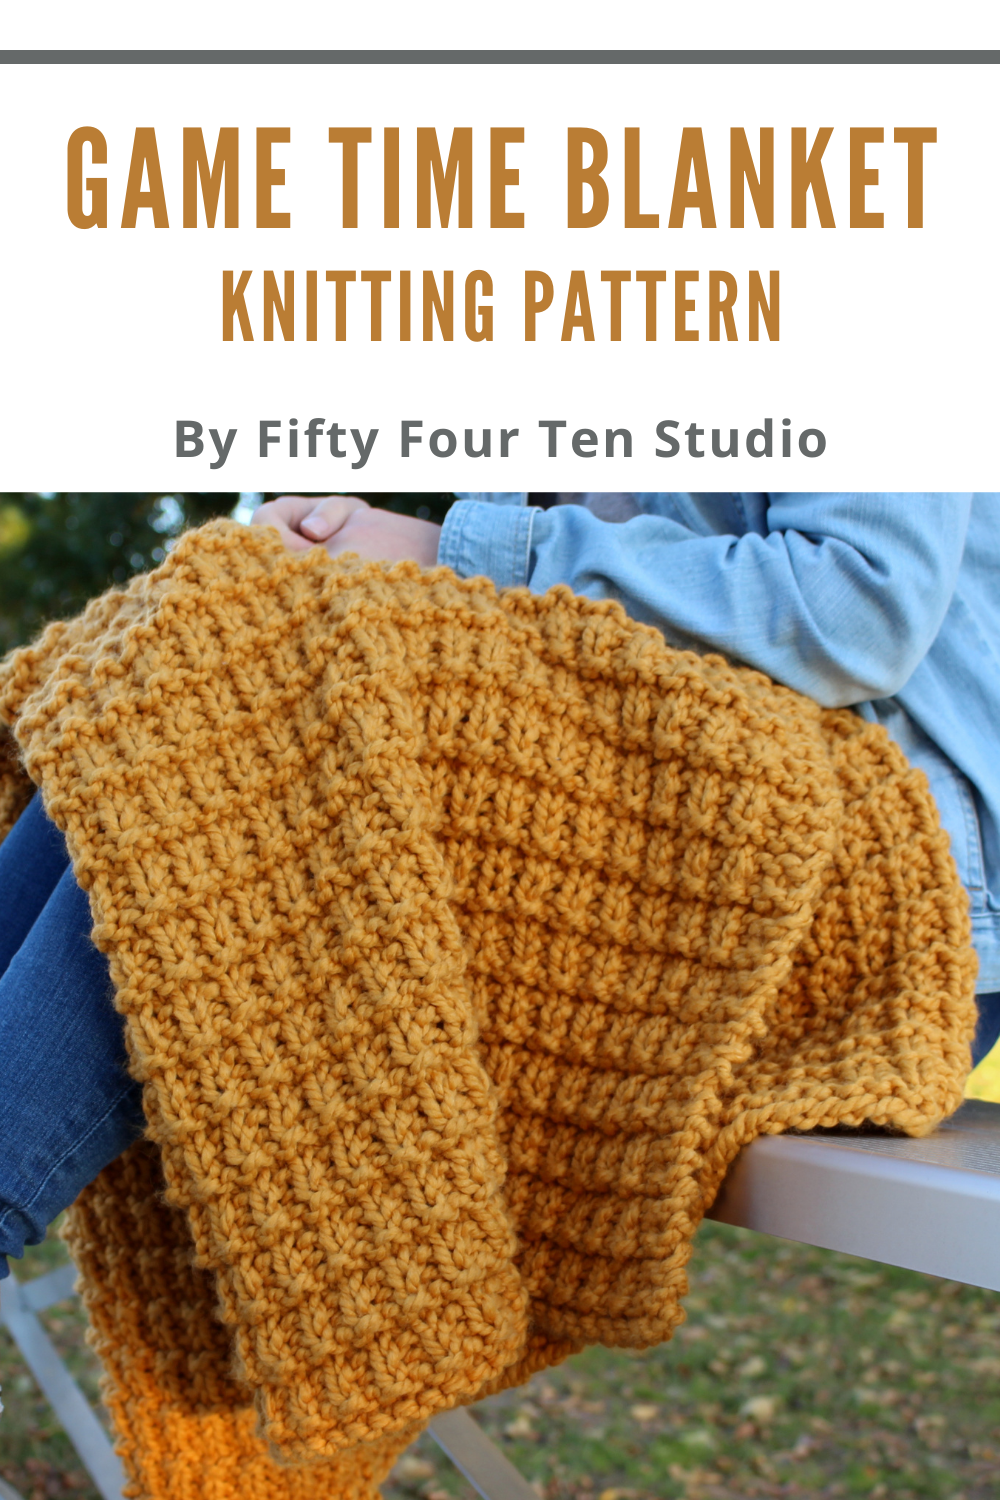 Baby Blanket Knitting Pattern For Beginners - This Yellow Farmhouse